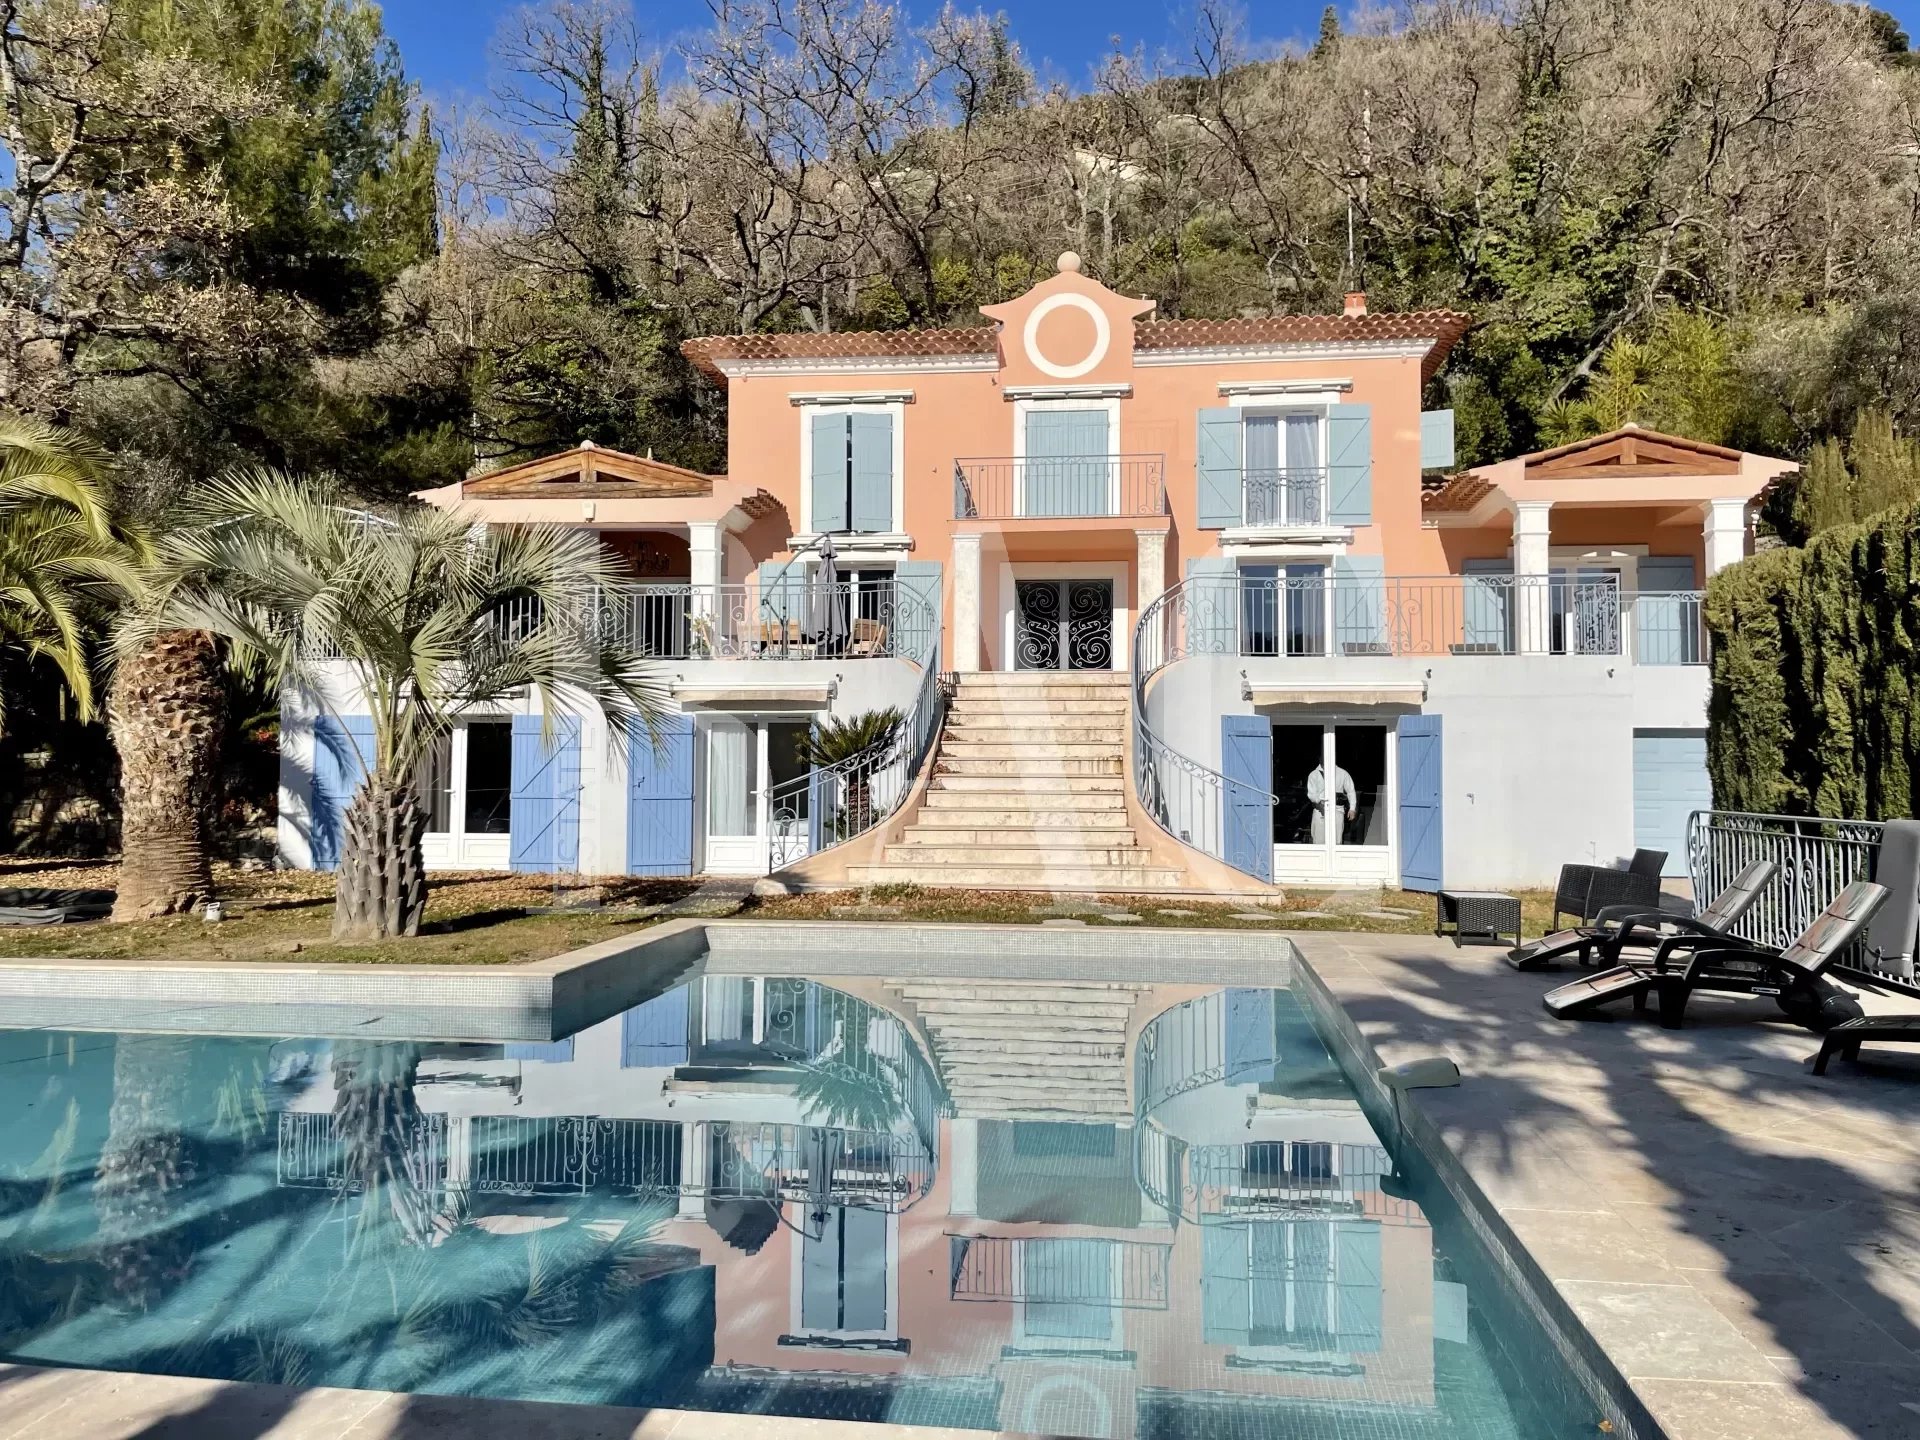 Quiet property, in a private domain, 30 minutes from the beaches and the center of Cannes